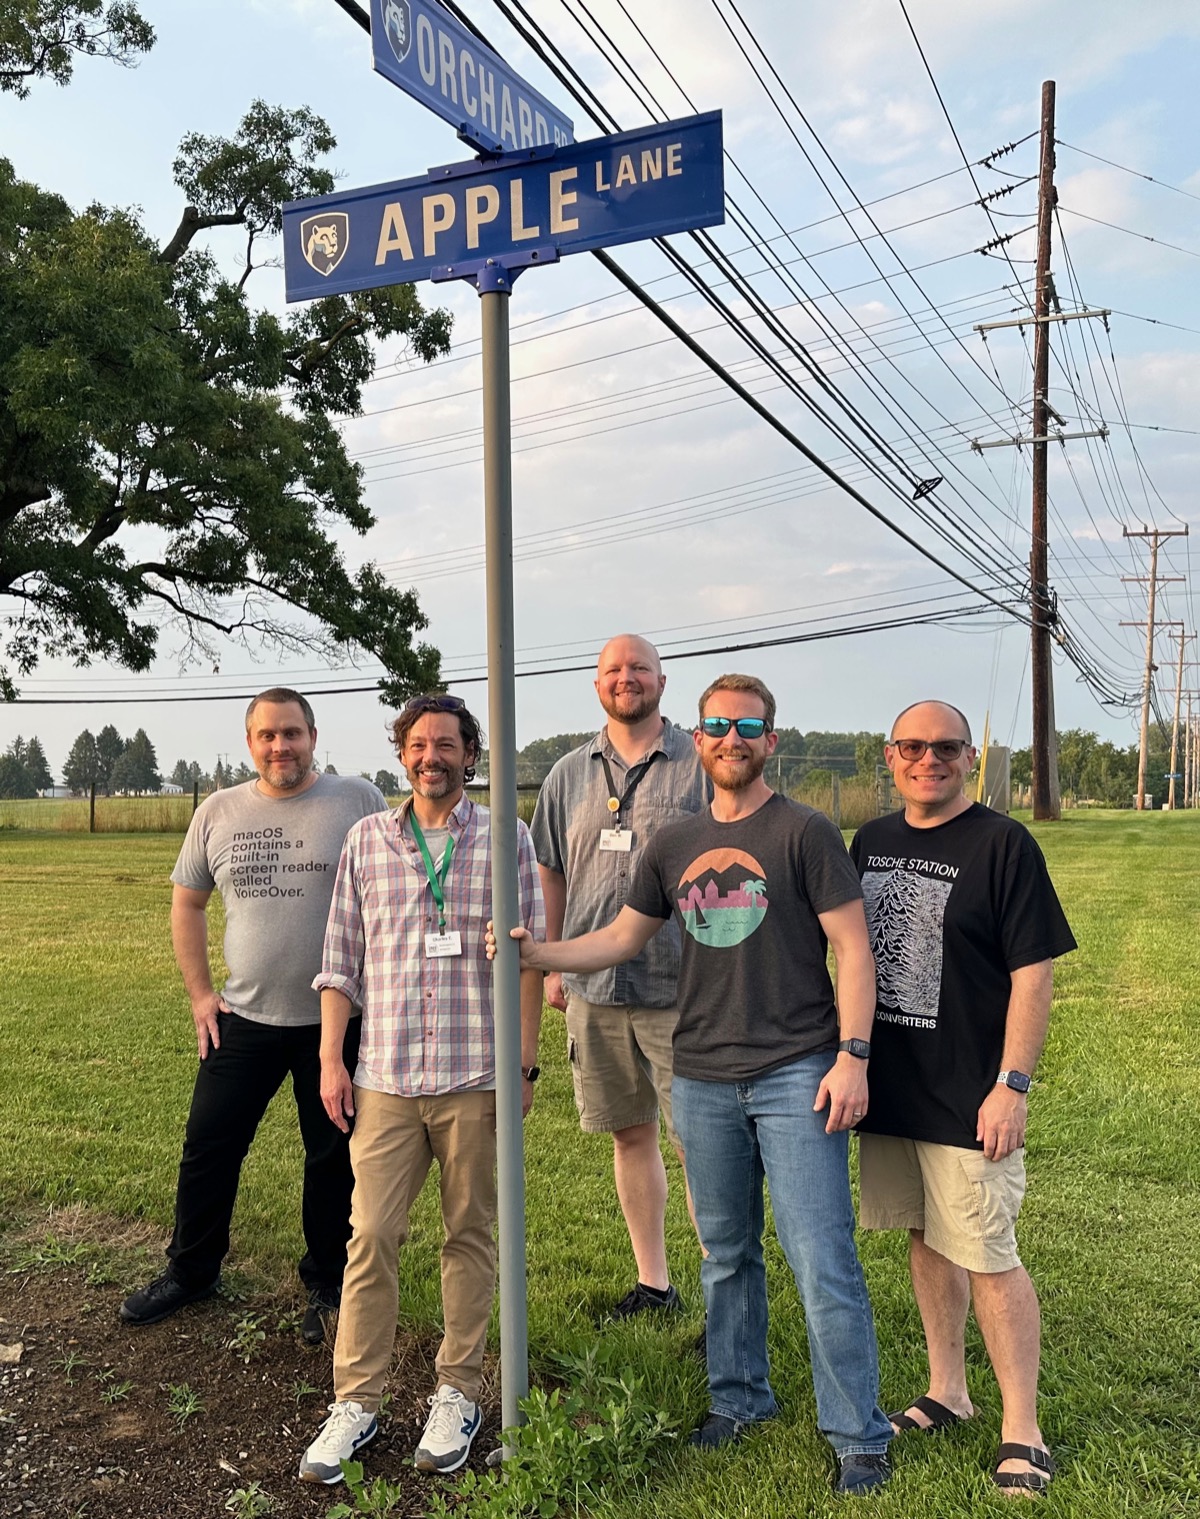 Charles Edge, myself, and a few other Mac Admins at the corner of Apple and Orchard streets on the Penn State campus.